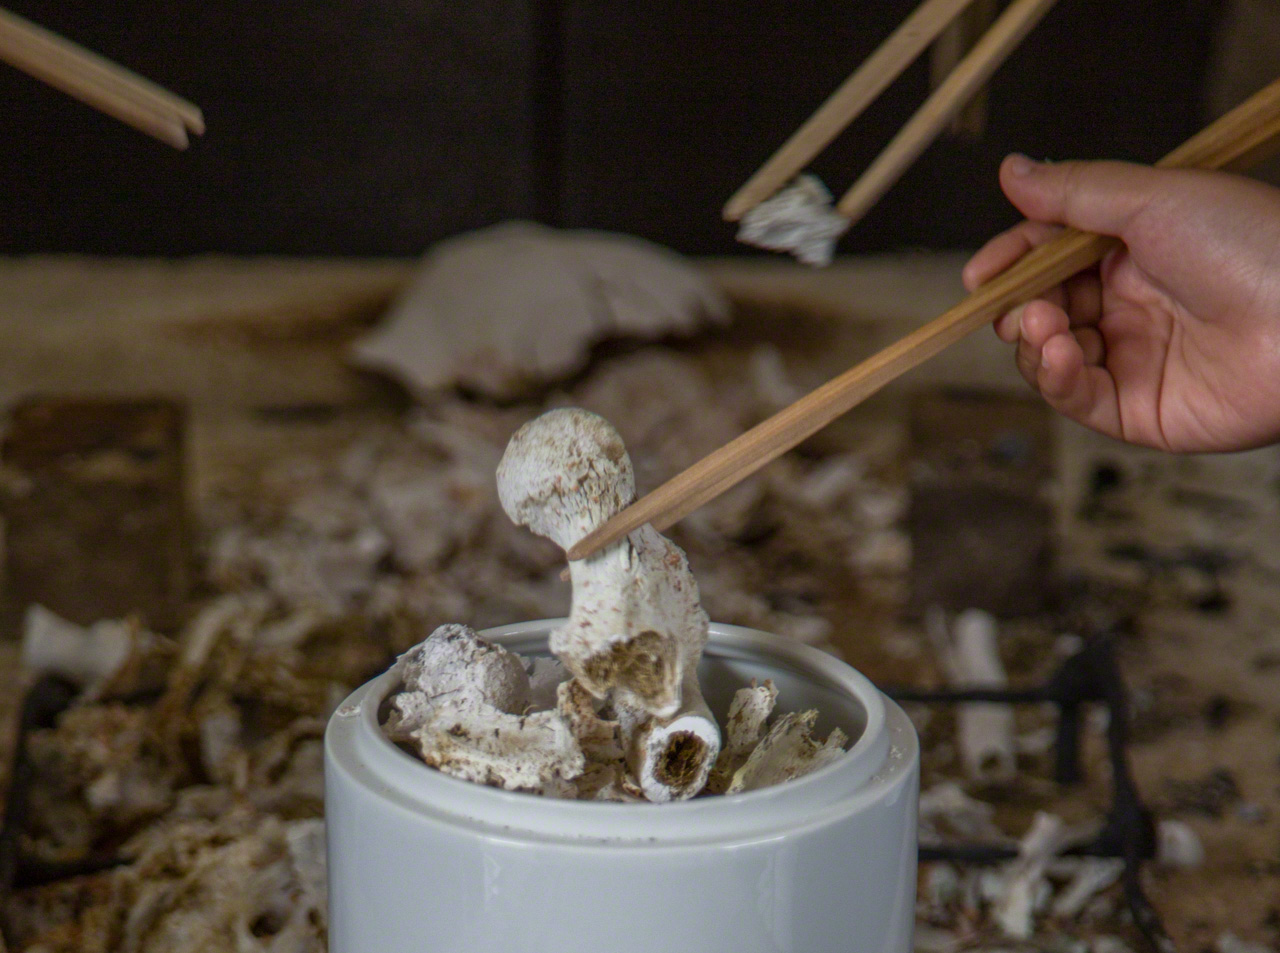 Transferring the bones to an urn after cremation at a Buddhist funeral in Japan. The physical flesh of this world becomes the biomineral of bone as the soul crosses over to the other shore. (© Ōnishi Naruaki)